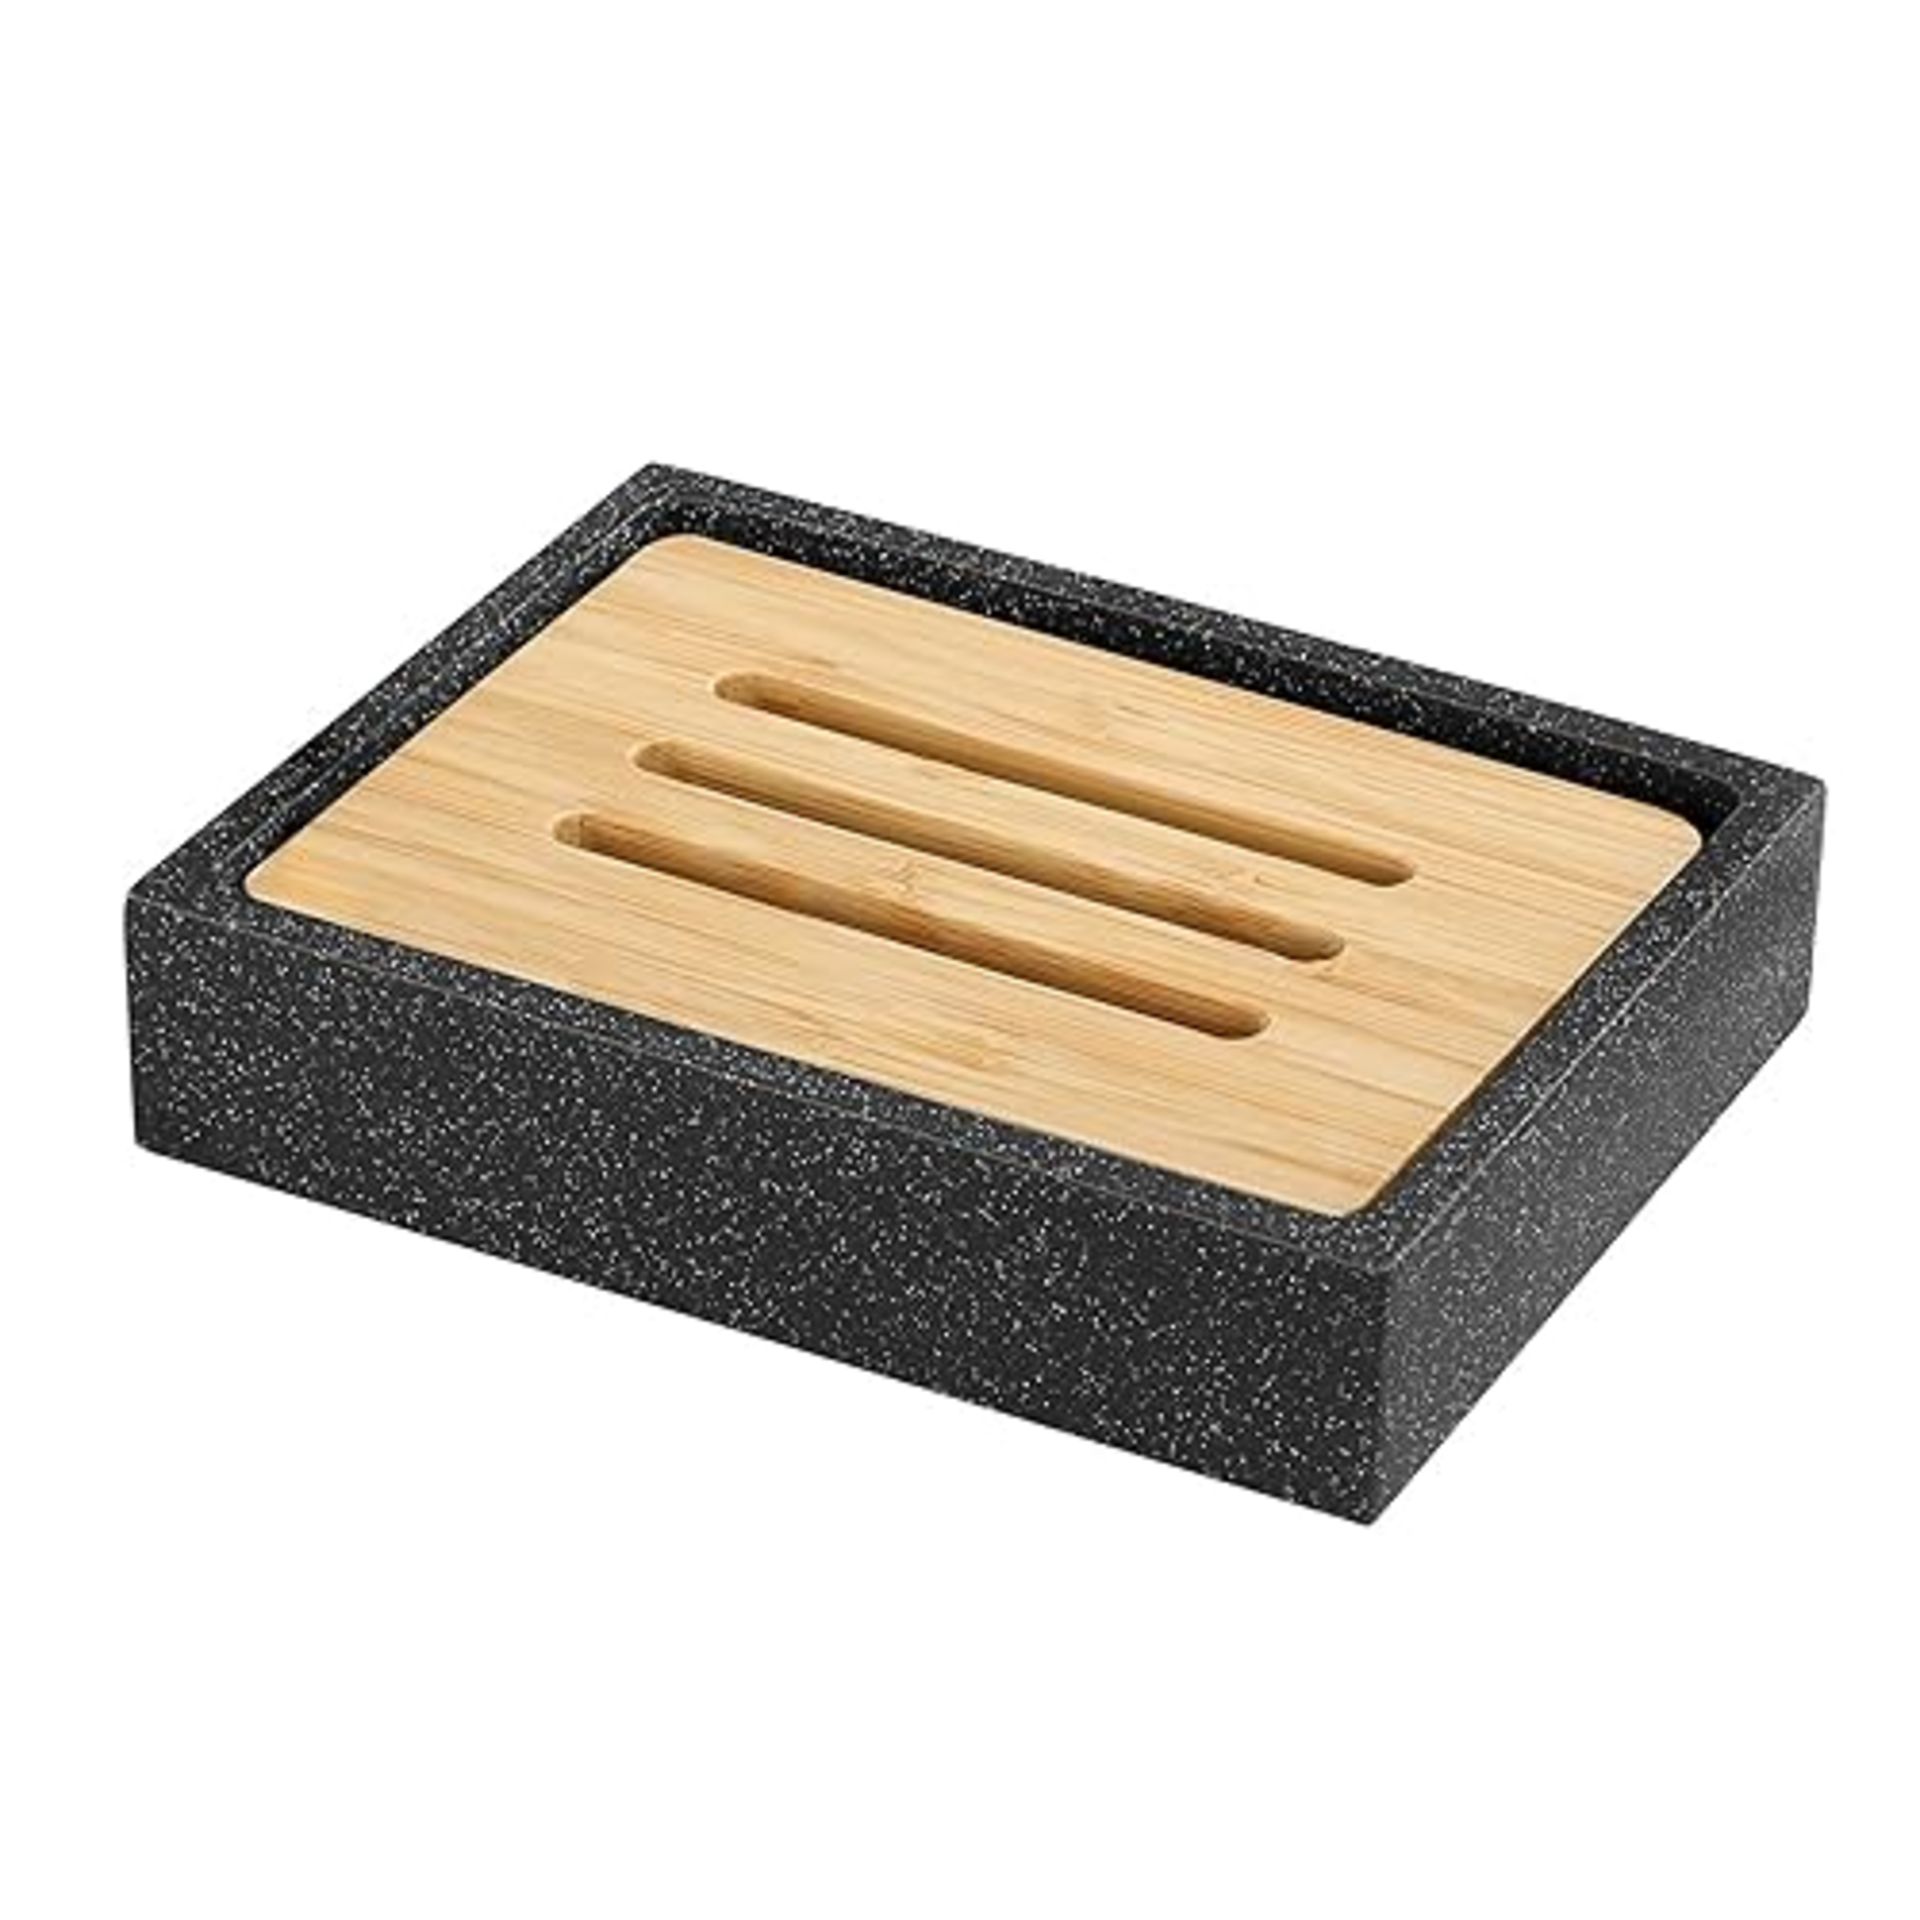 Luxspire Soap Dish Tray, Resin Soap Dish, Bamboo Soap Bar Holder Box for Shower Kitchen Sink, Doubl